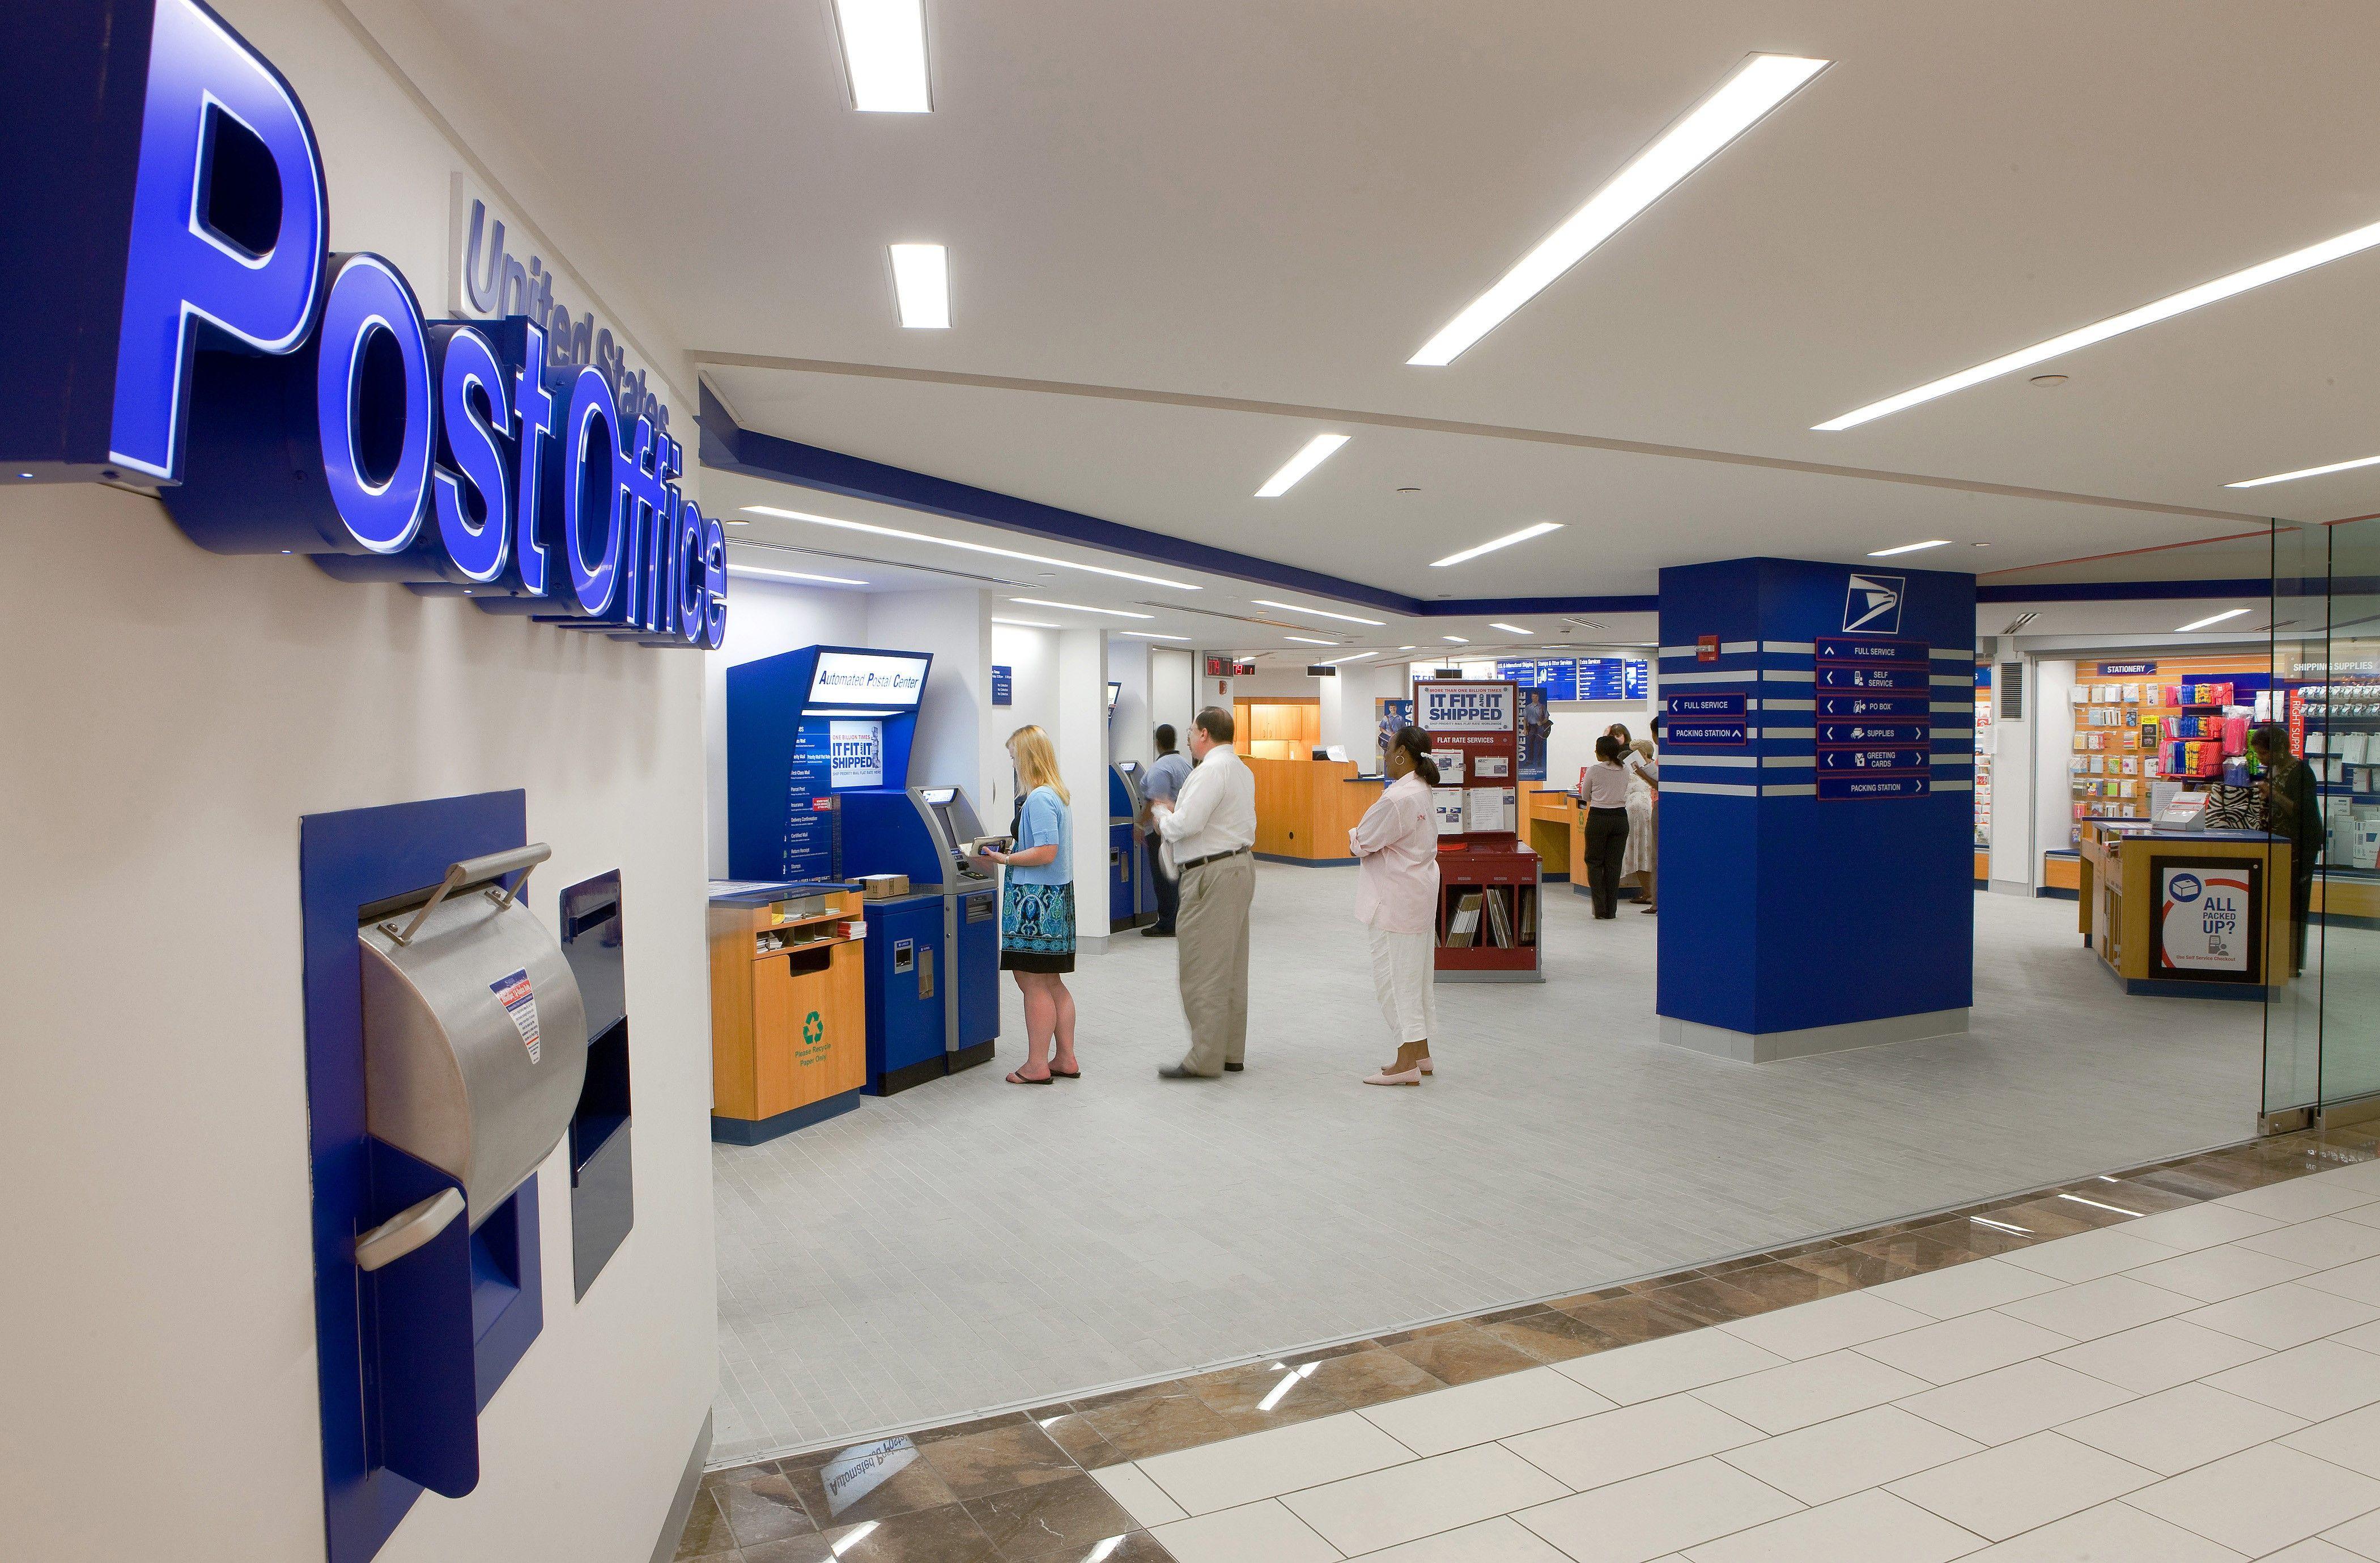 2018 USPS Logo - Post Offices will close Dec. 25 and Jan. 1 - Newsroom - About.usps.com